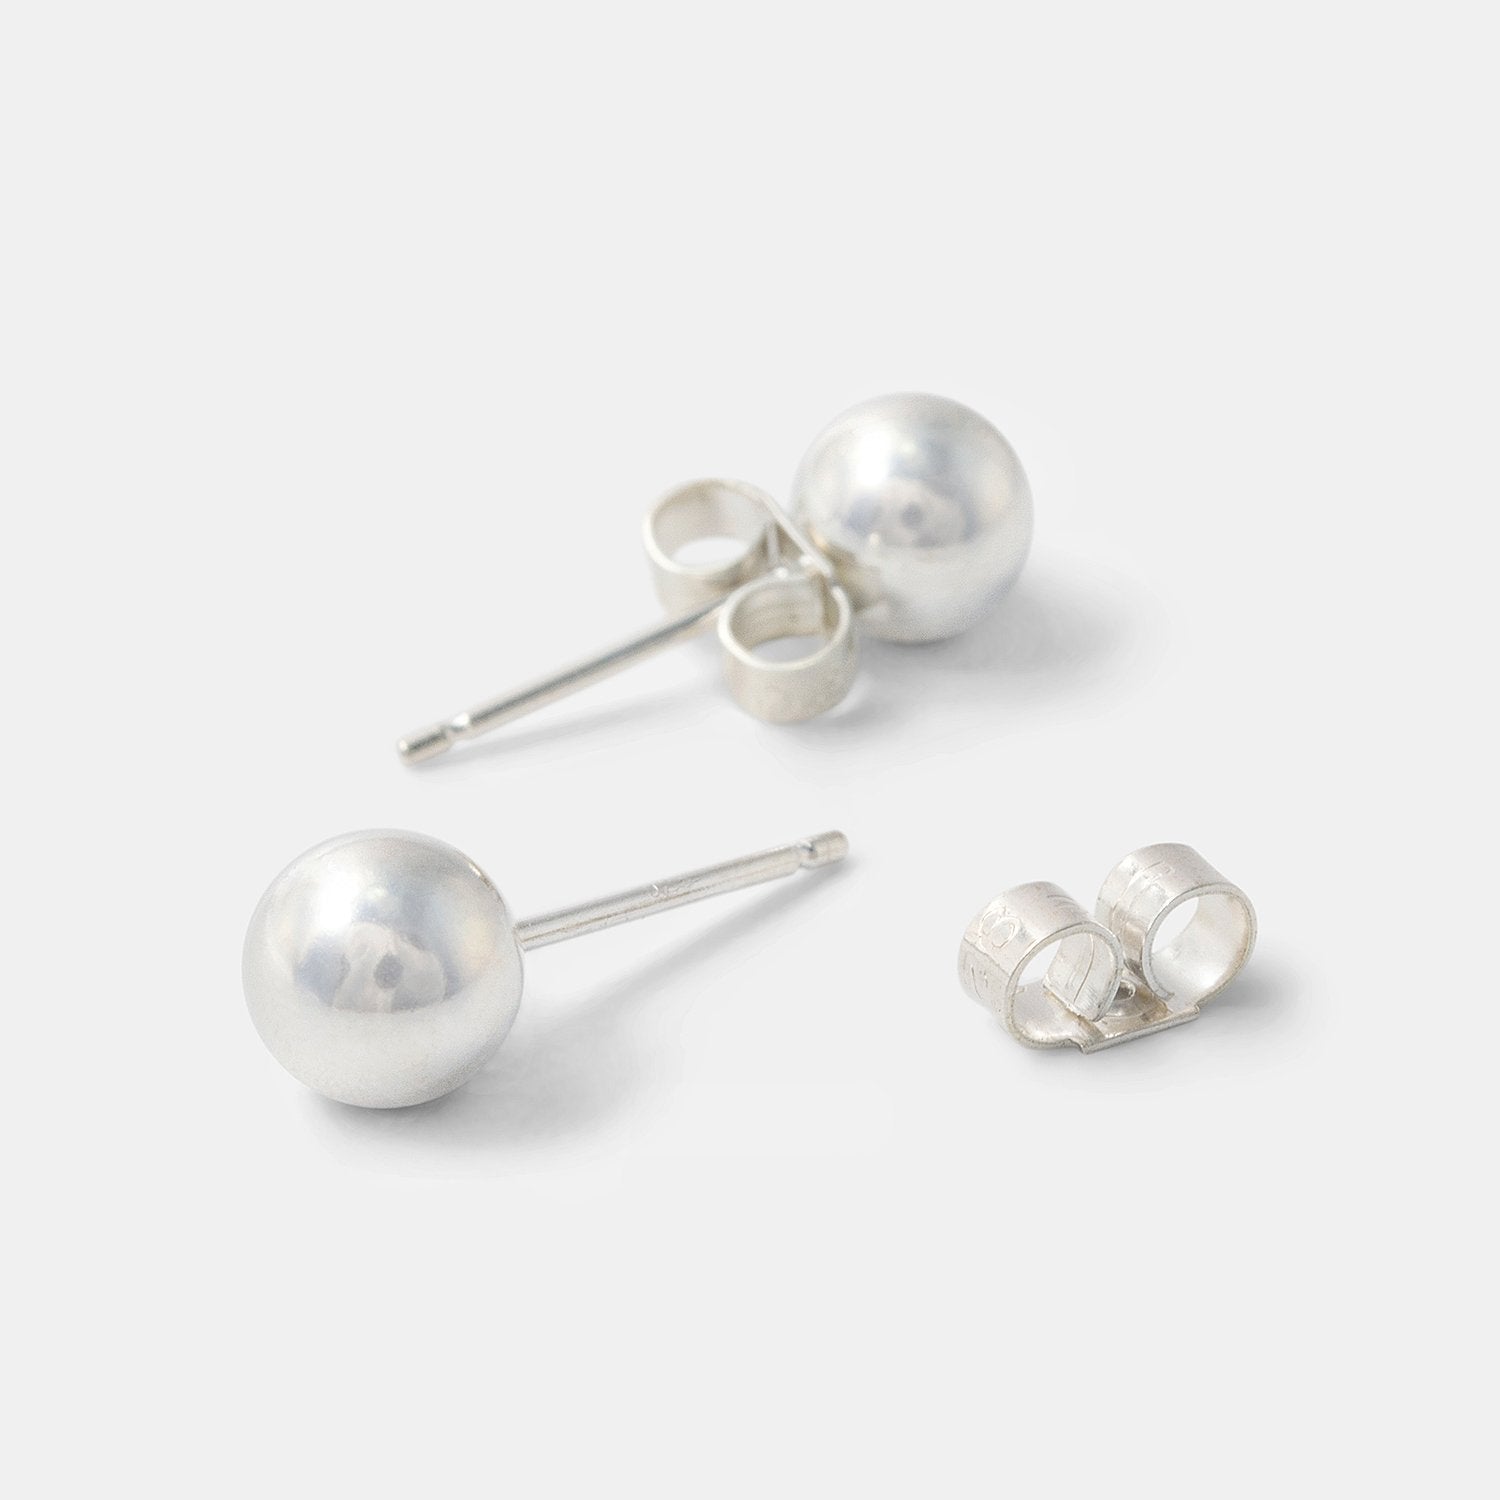 925 silver ball earrings with 3 large smooth and satin spheres   NonSoloArgenti